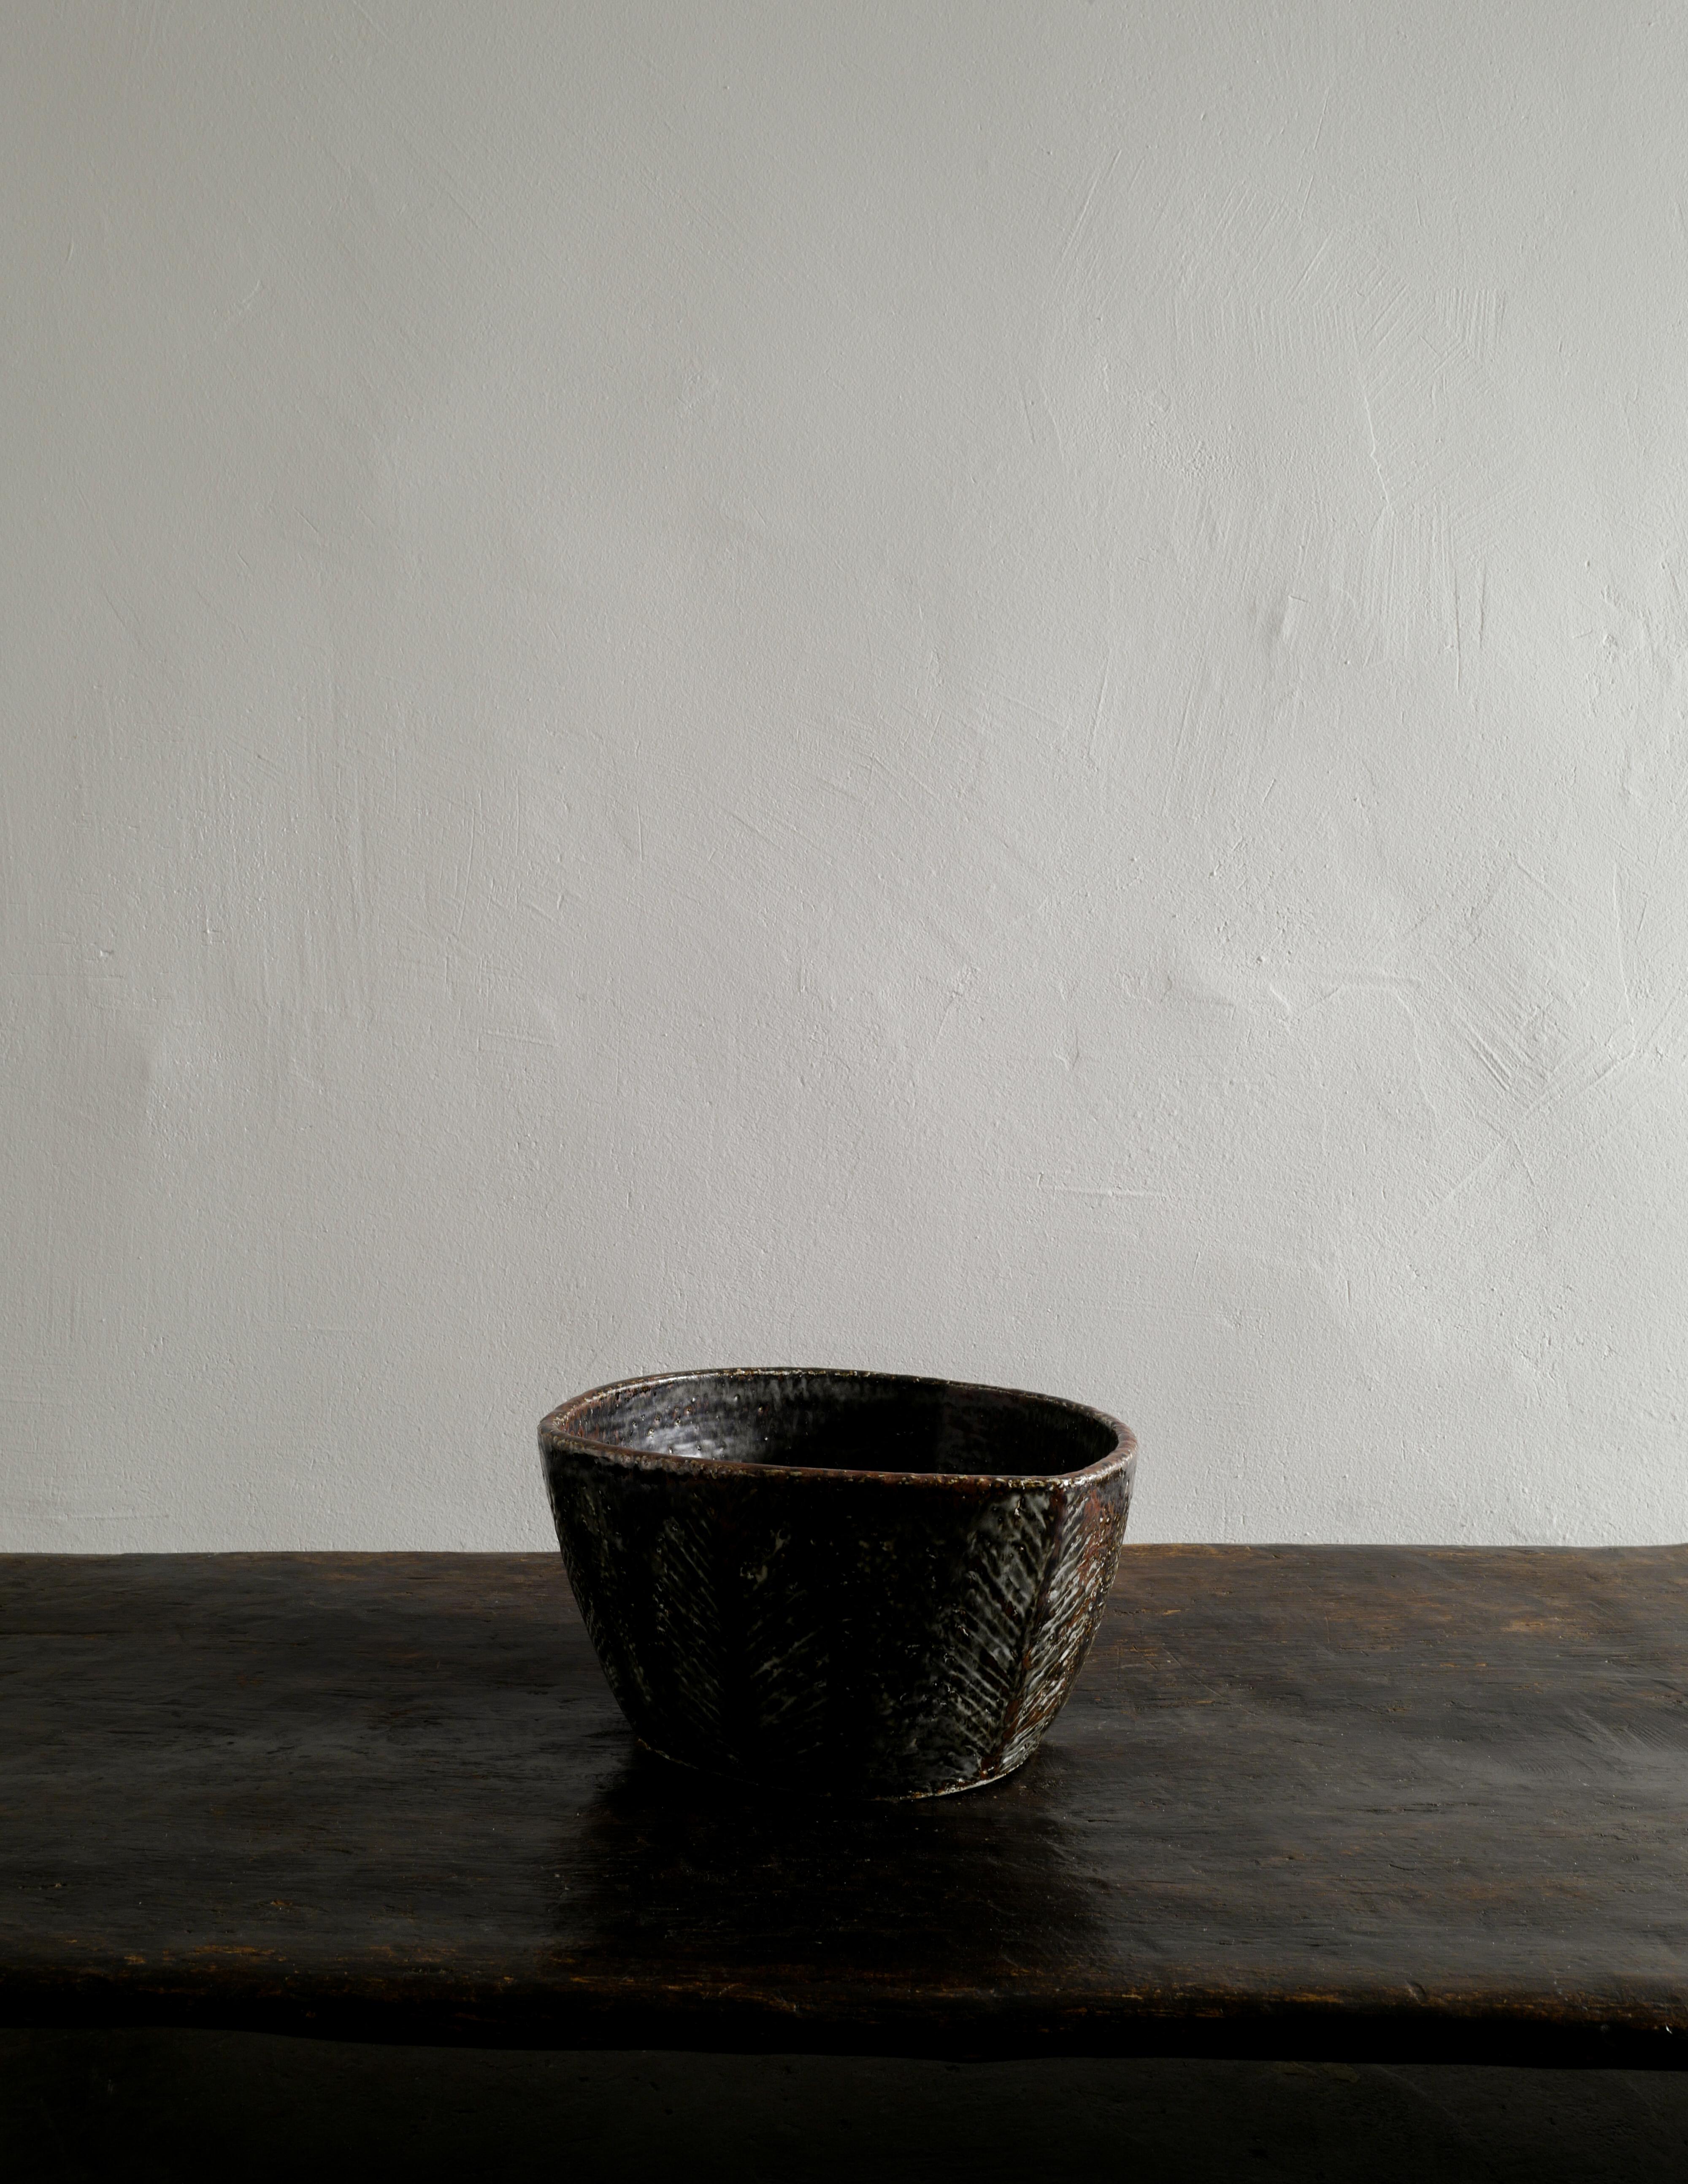 Rare and unique large stoneware bowl by Carl-Harry Stålhane for Rörstrand produced in Sweden in the 1950s. Beautiful handmade decor and the bowl is in great original condition without any defects or flaws. Signed 